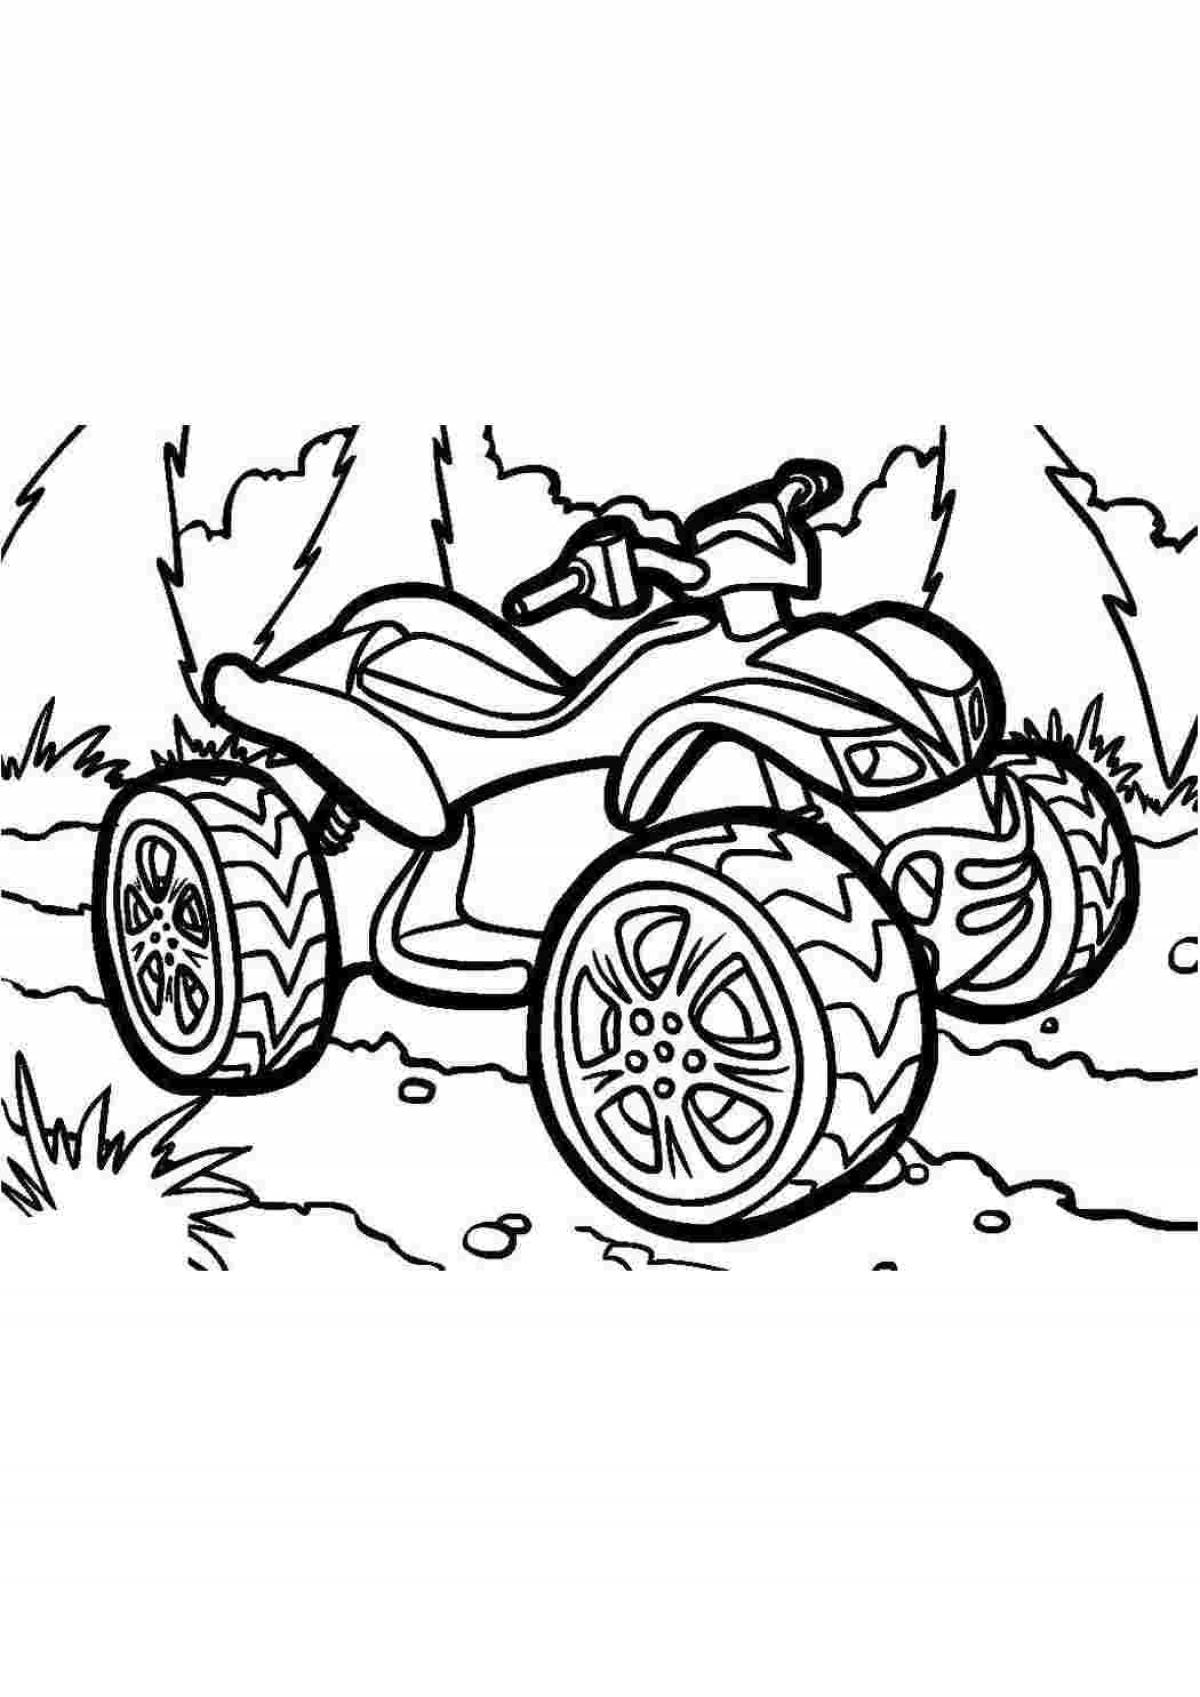 Cool quad bike coloring book for kids